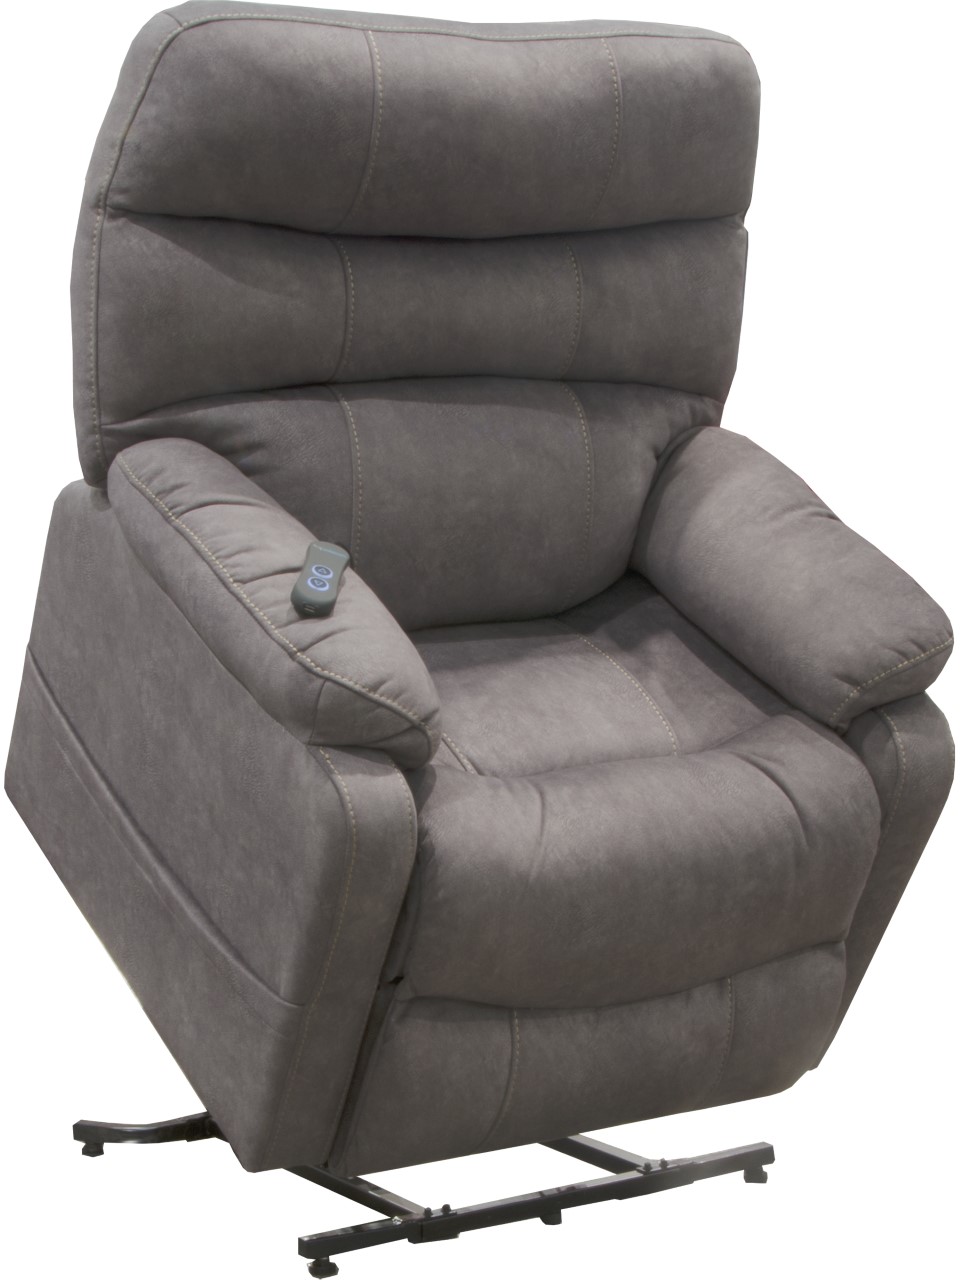 Click photo for details • The Buckley powerlift recliner by Catnapper® features: 300LB capacity. Steel coil seating. Polyester fabric • 38"W x 44"H x 39"D • $769.99